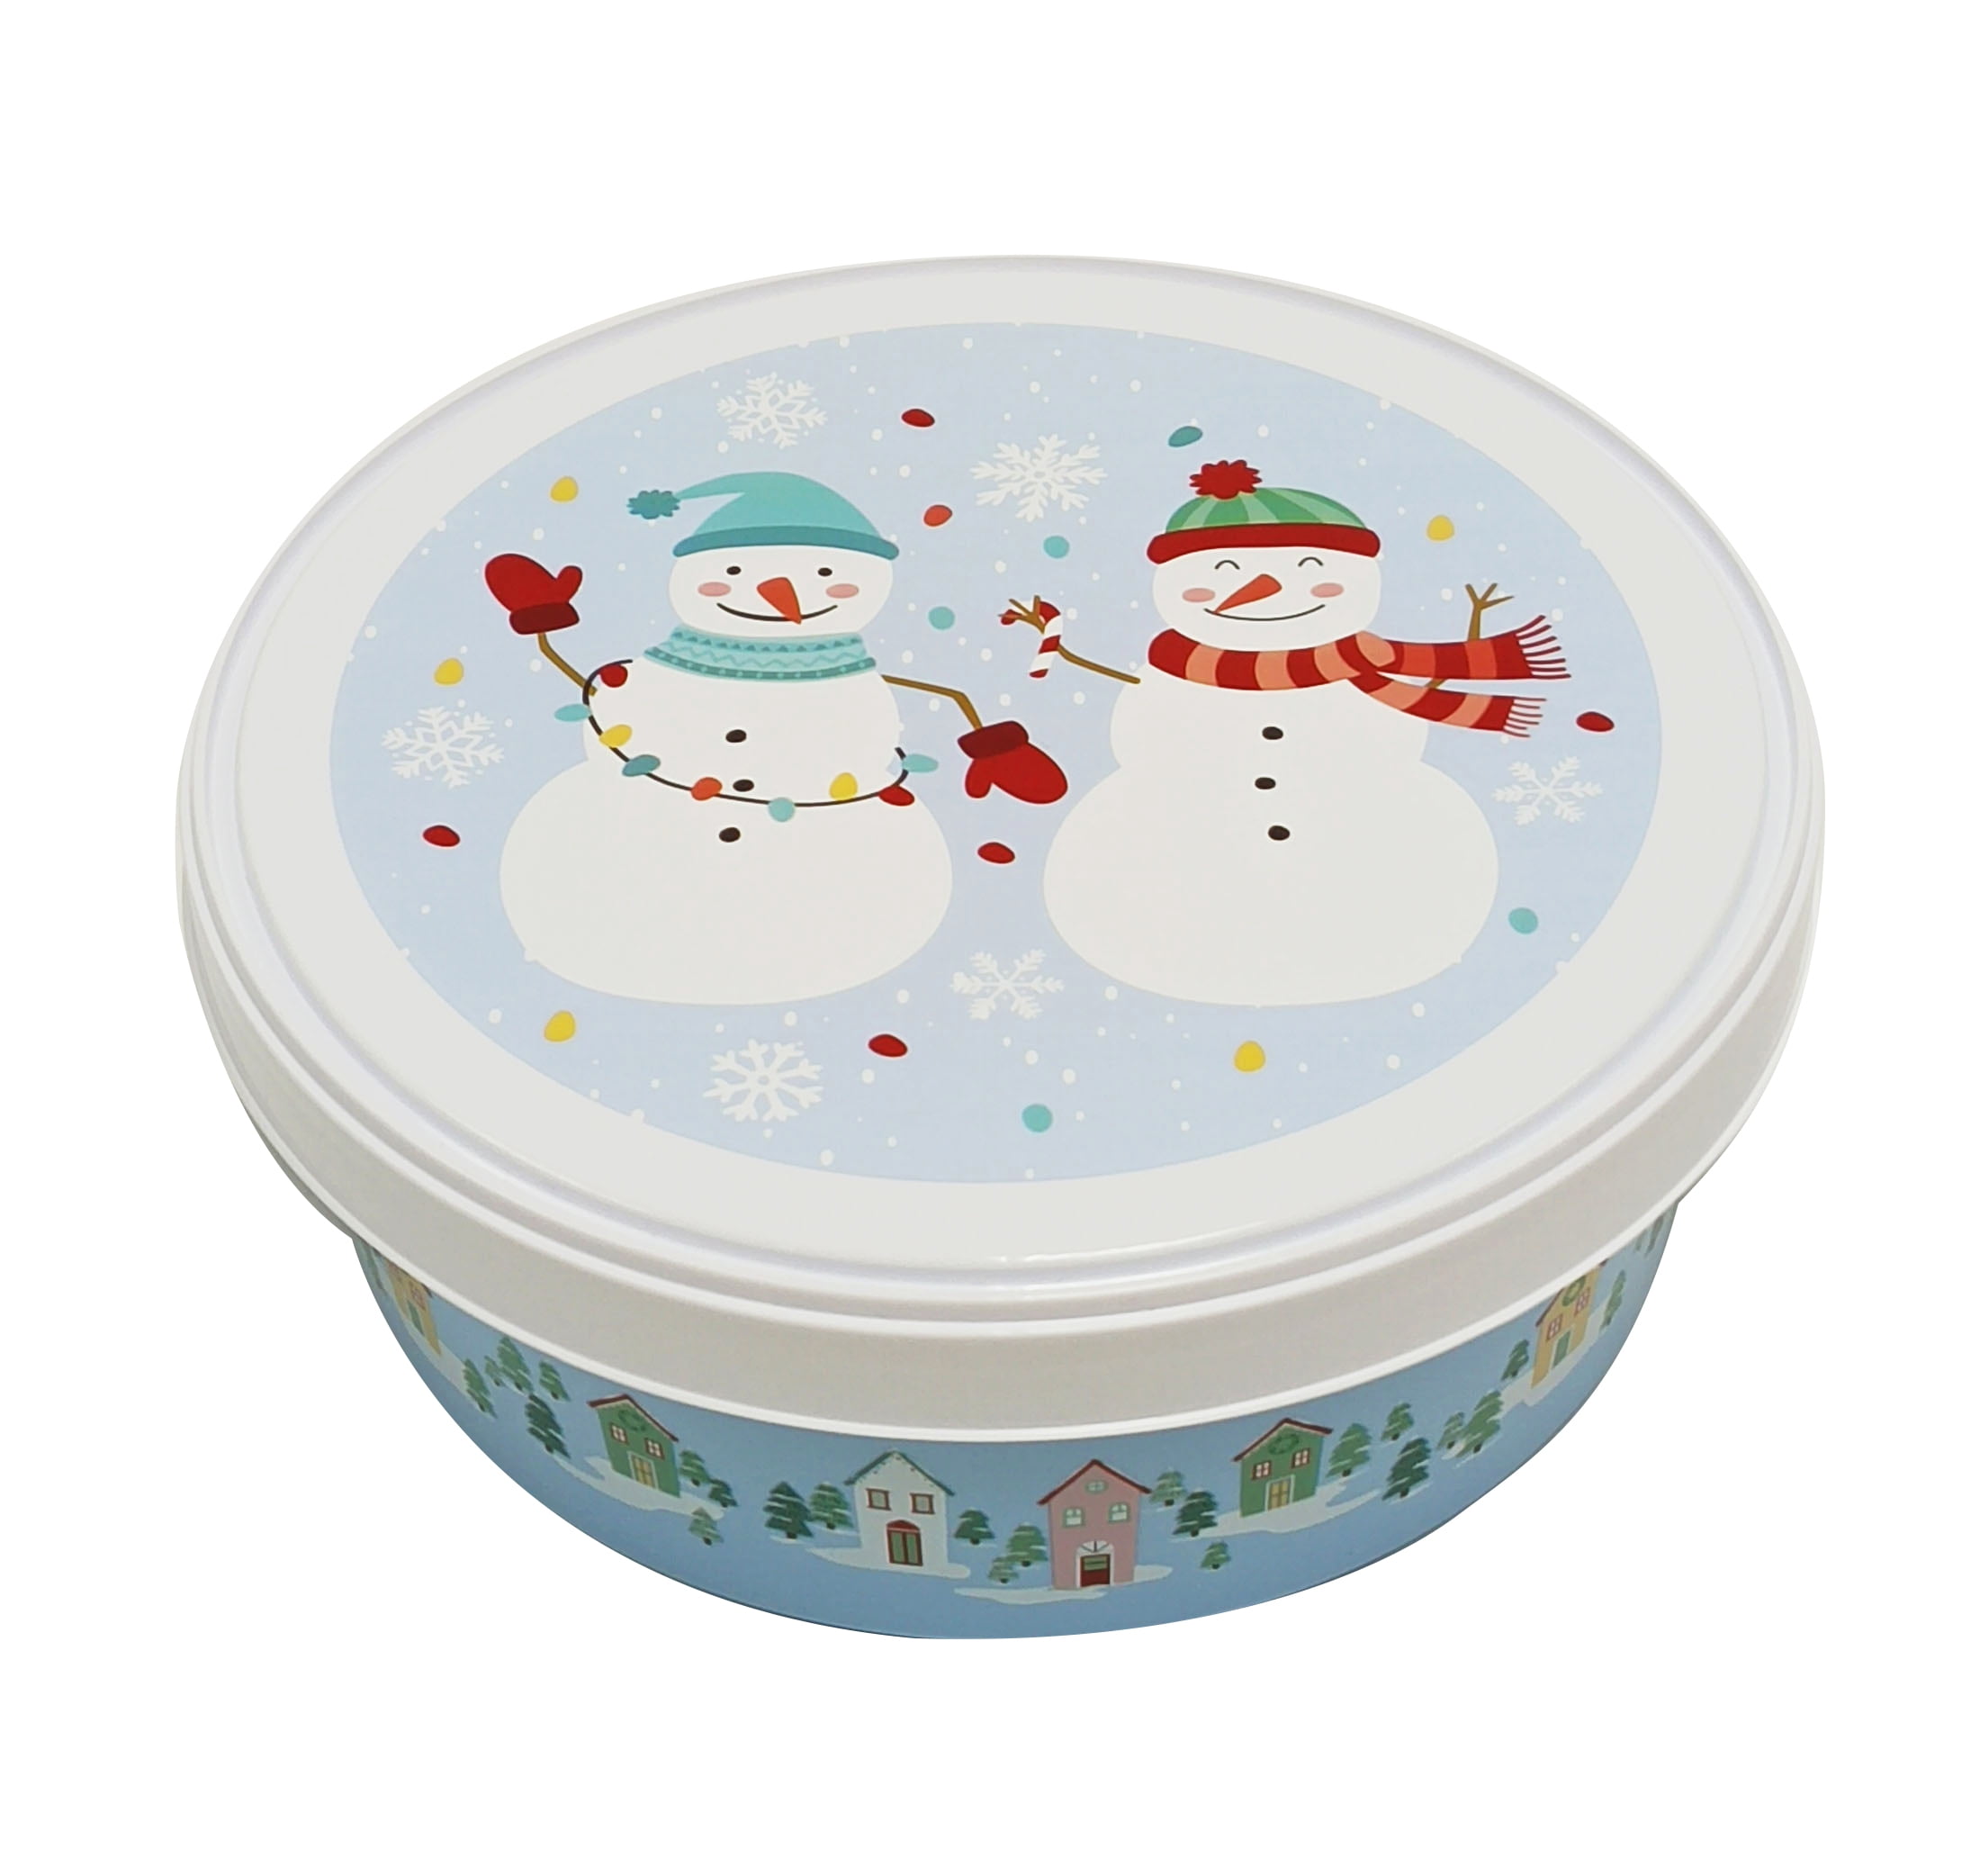 Plastic Christmas Themed Treat Container-Used